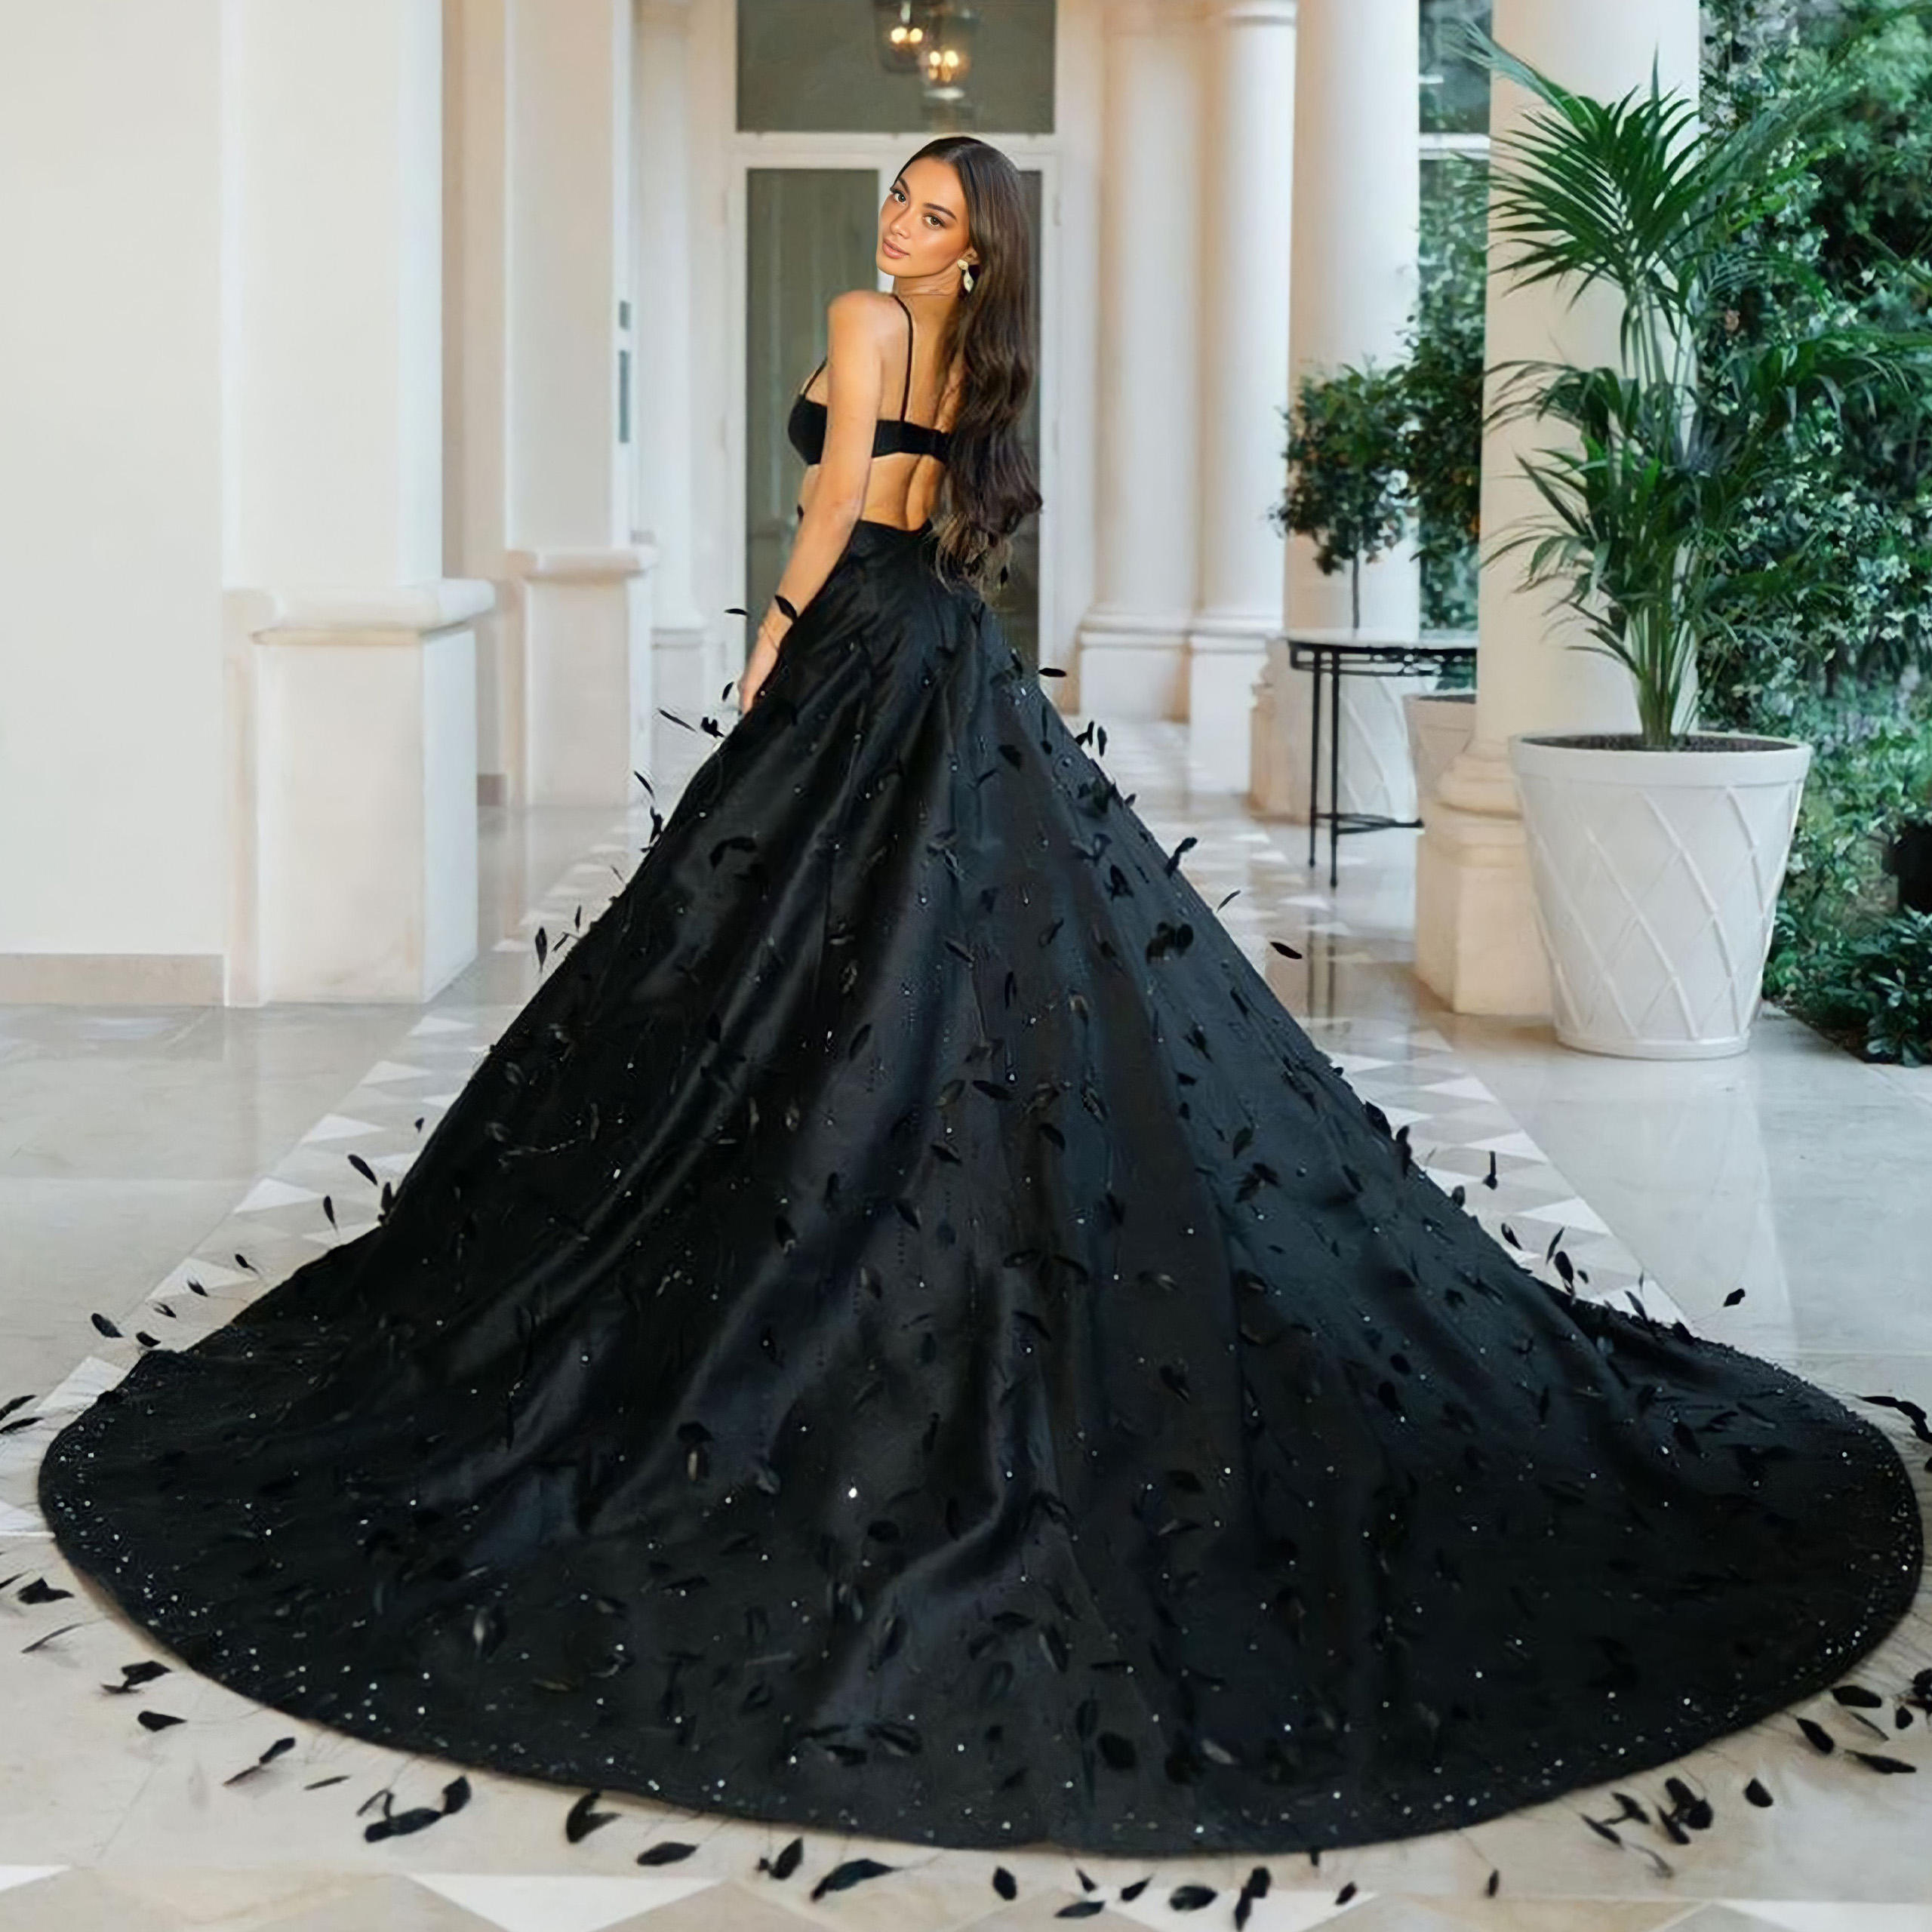 Kylie Verzosa Showcases Classic Elegance at Cannes